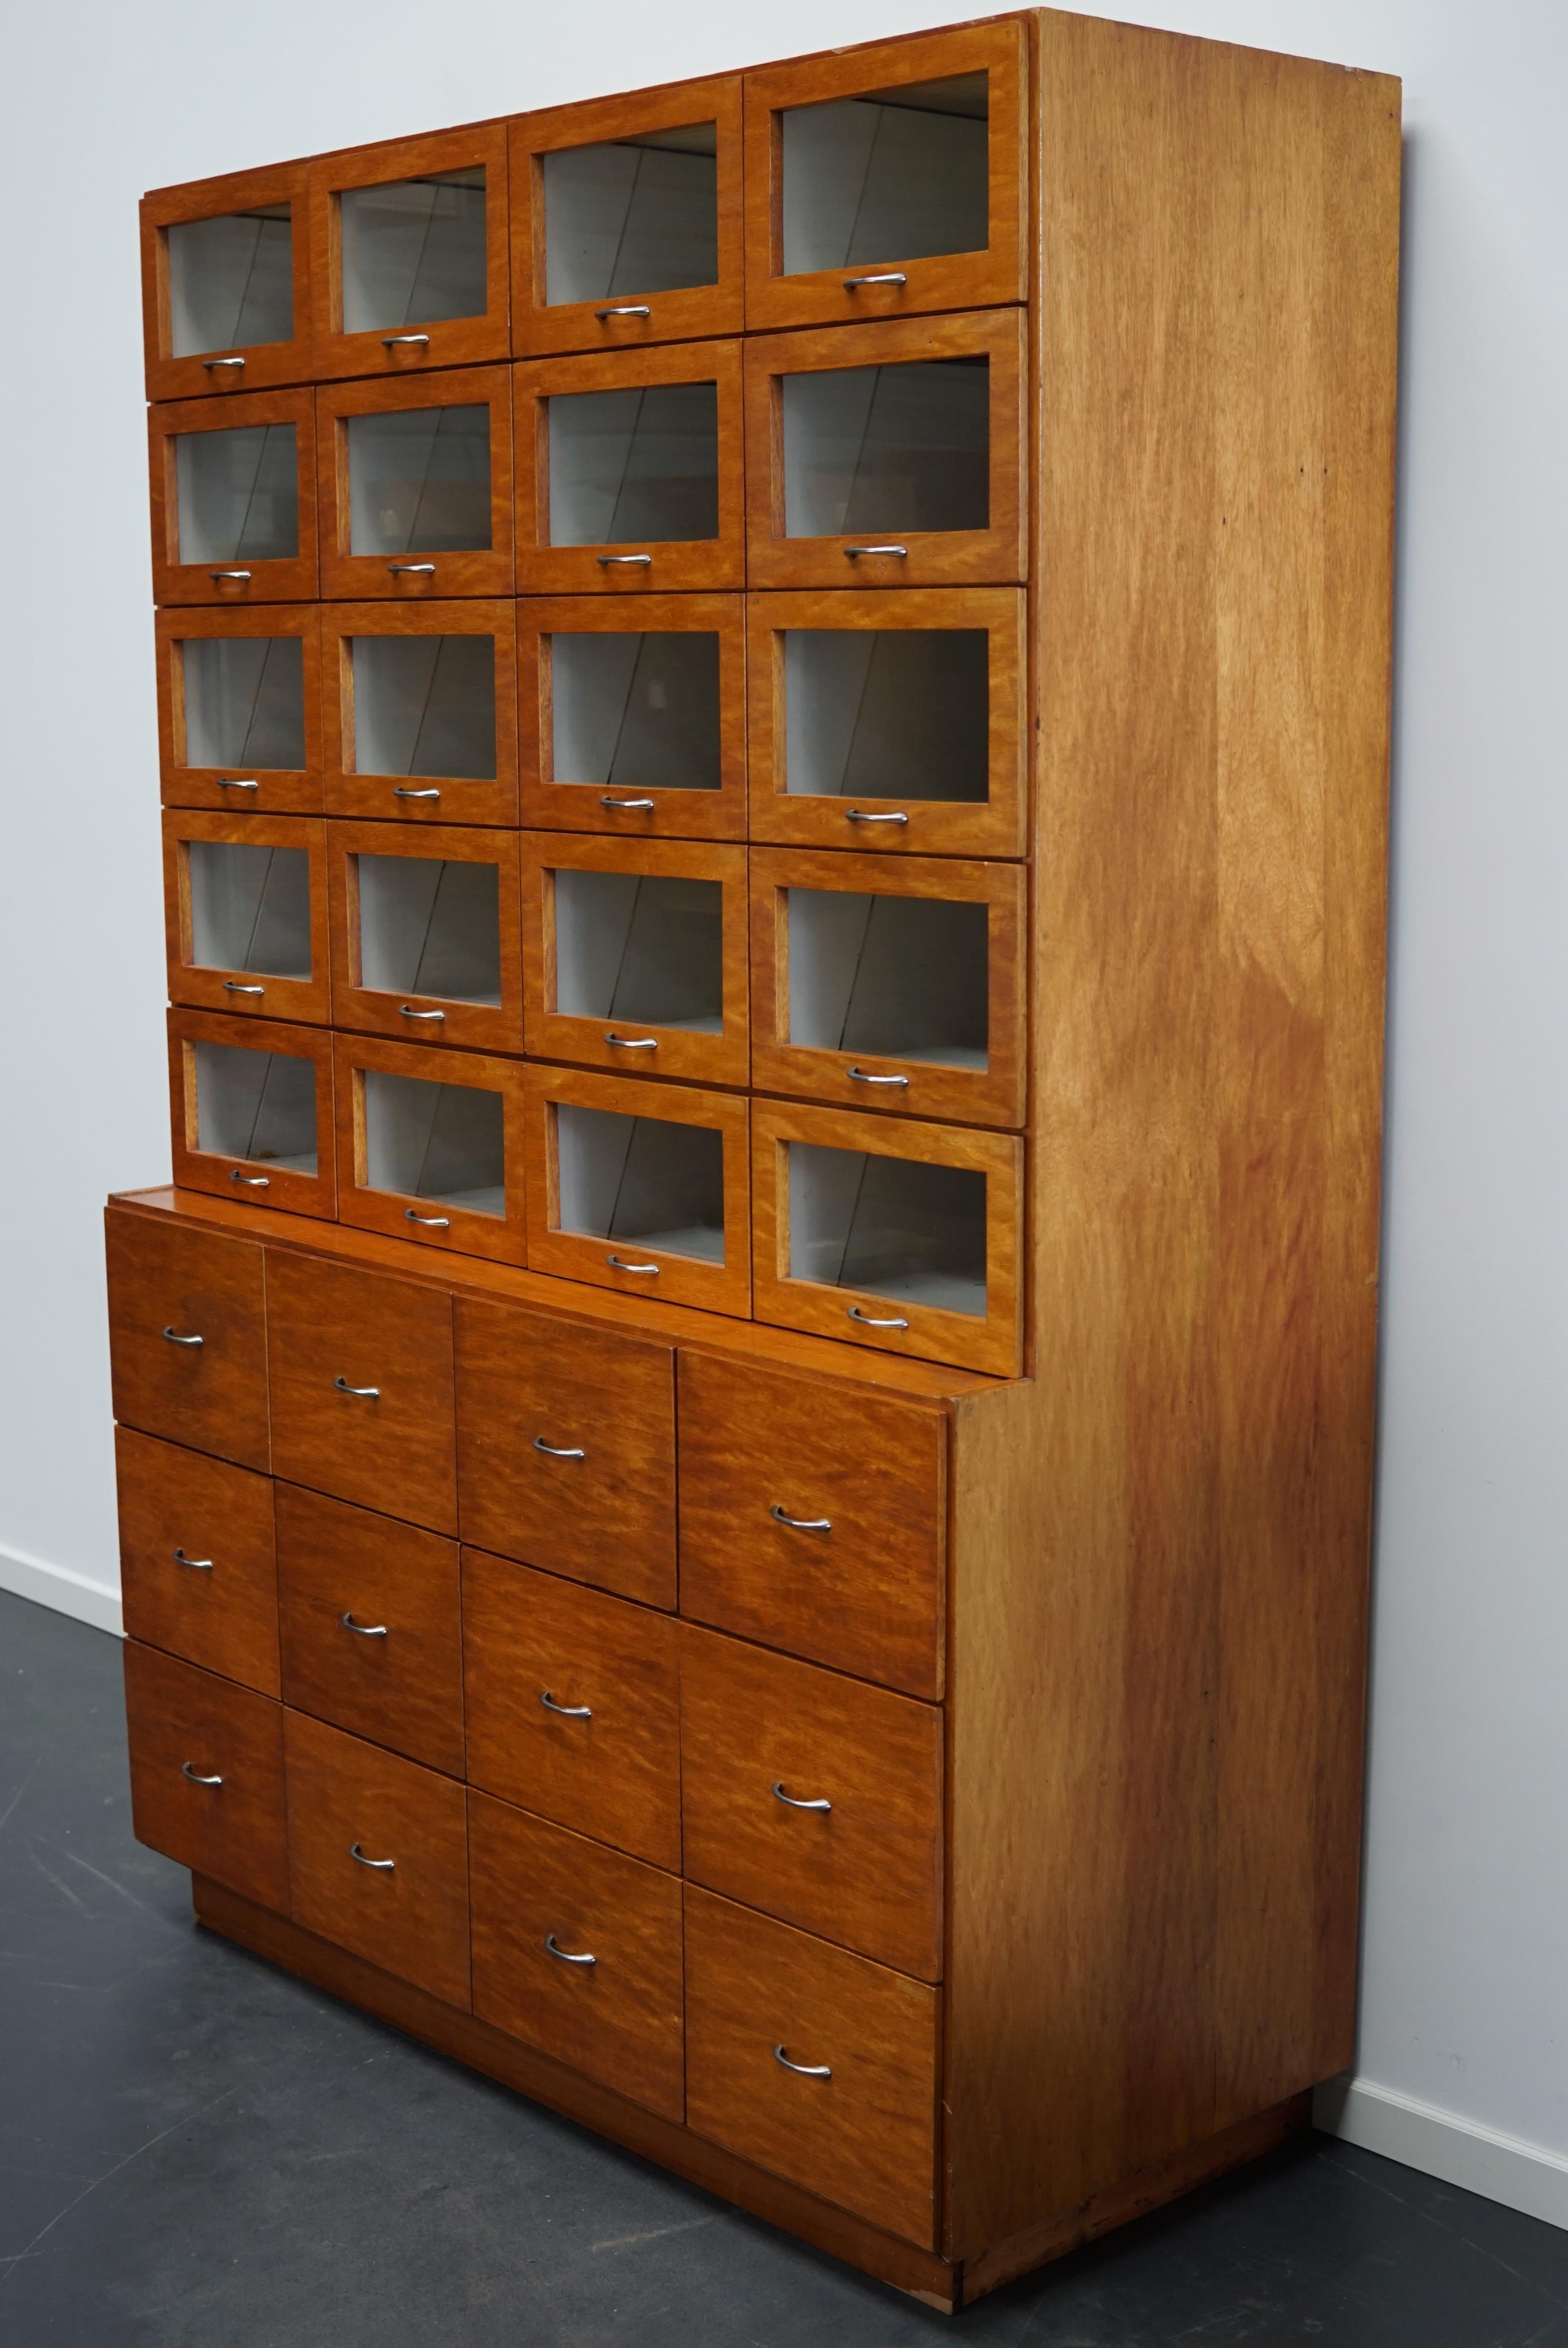 This haberdashery cabinet was produced during the 1950s in the Netherlands. This piece features 32 drawers in oak ply with glass fronts and chrome handles. It was originally used in a shop for sewing supplies and fabrics in Amsterdam. The interior